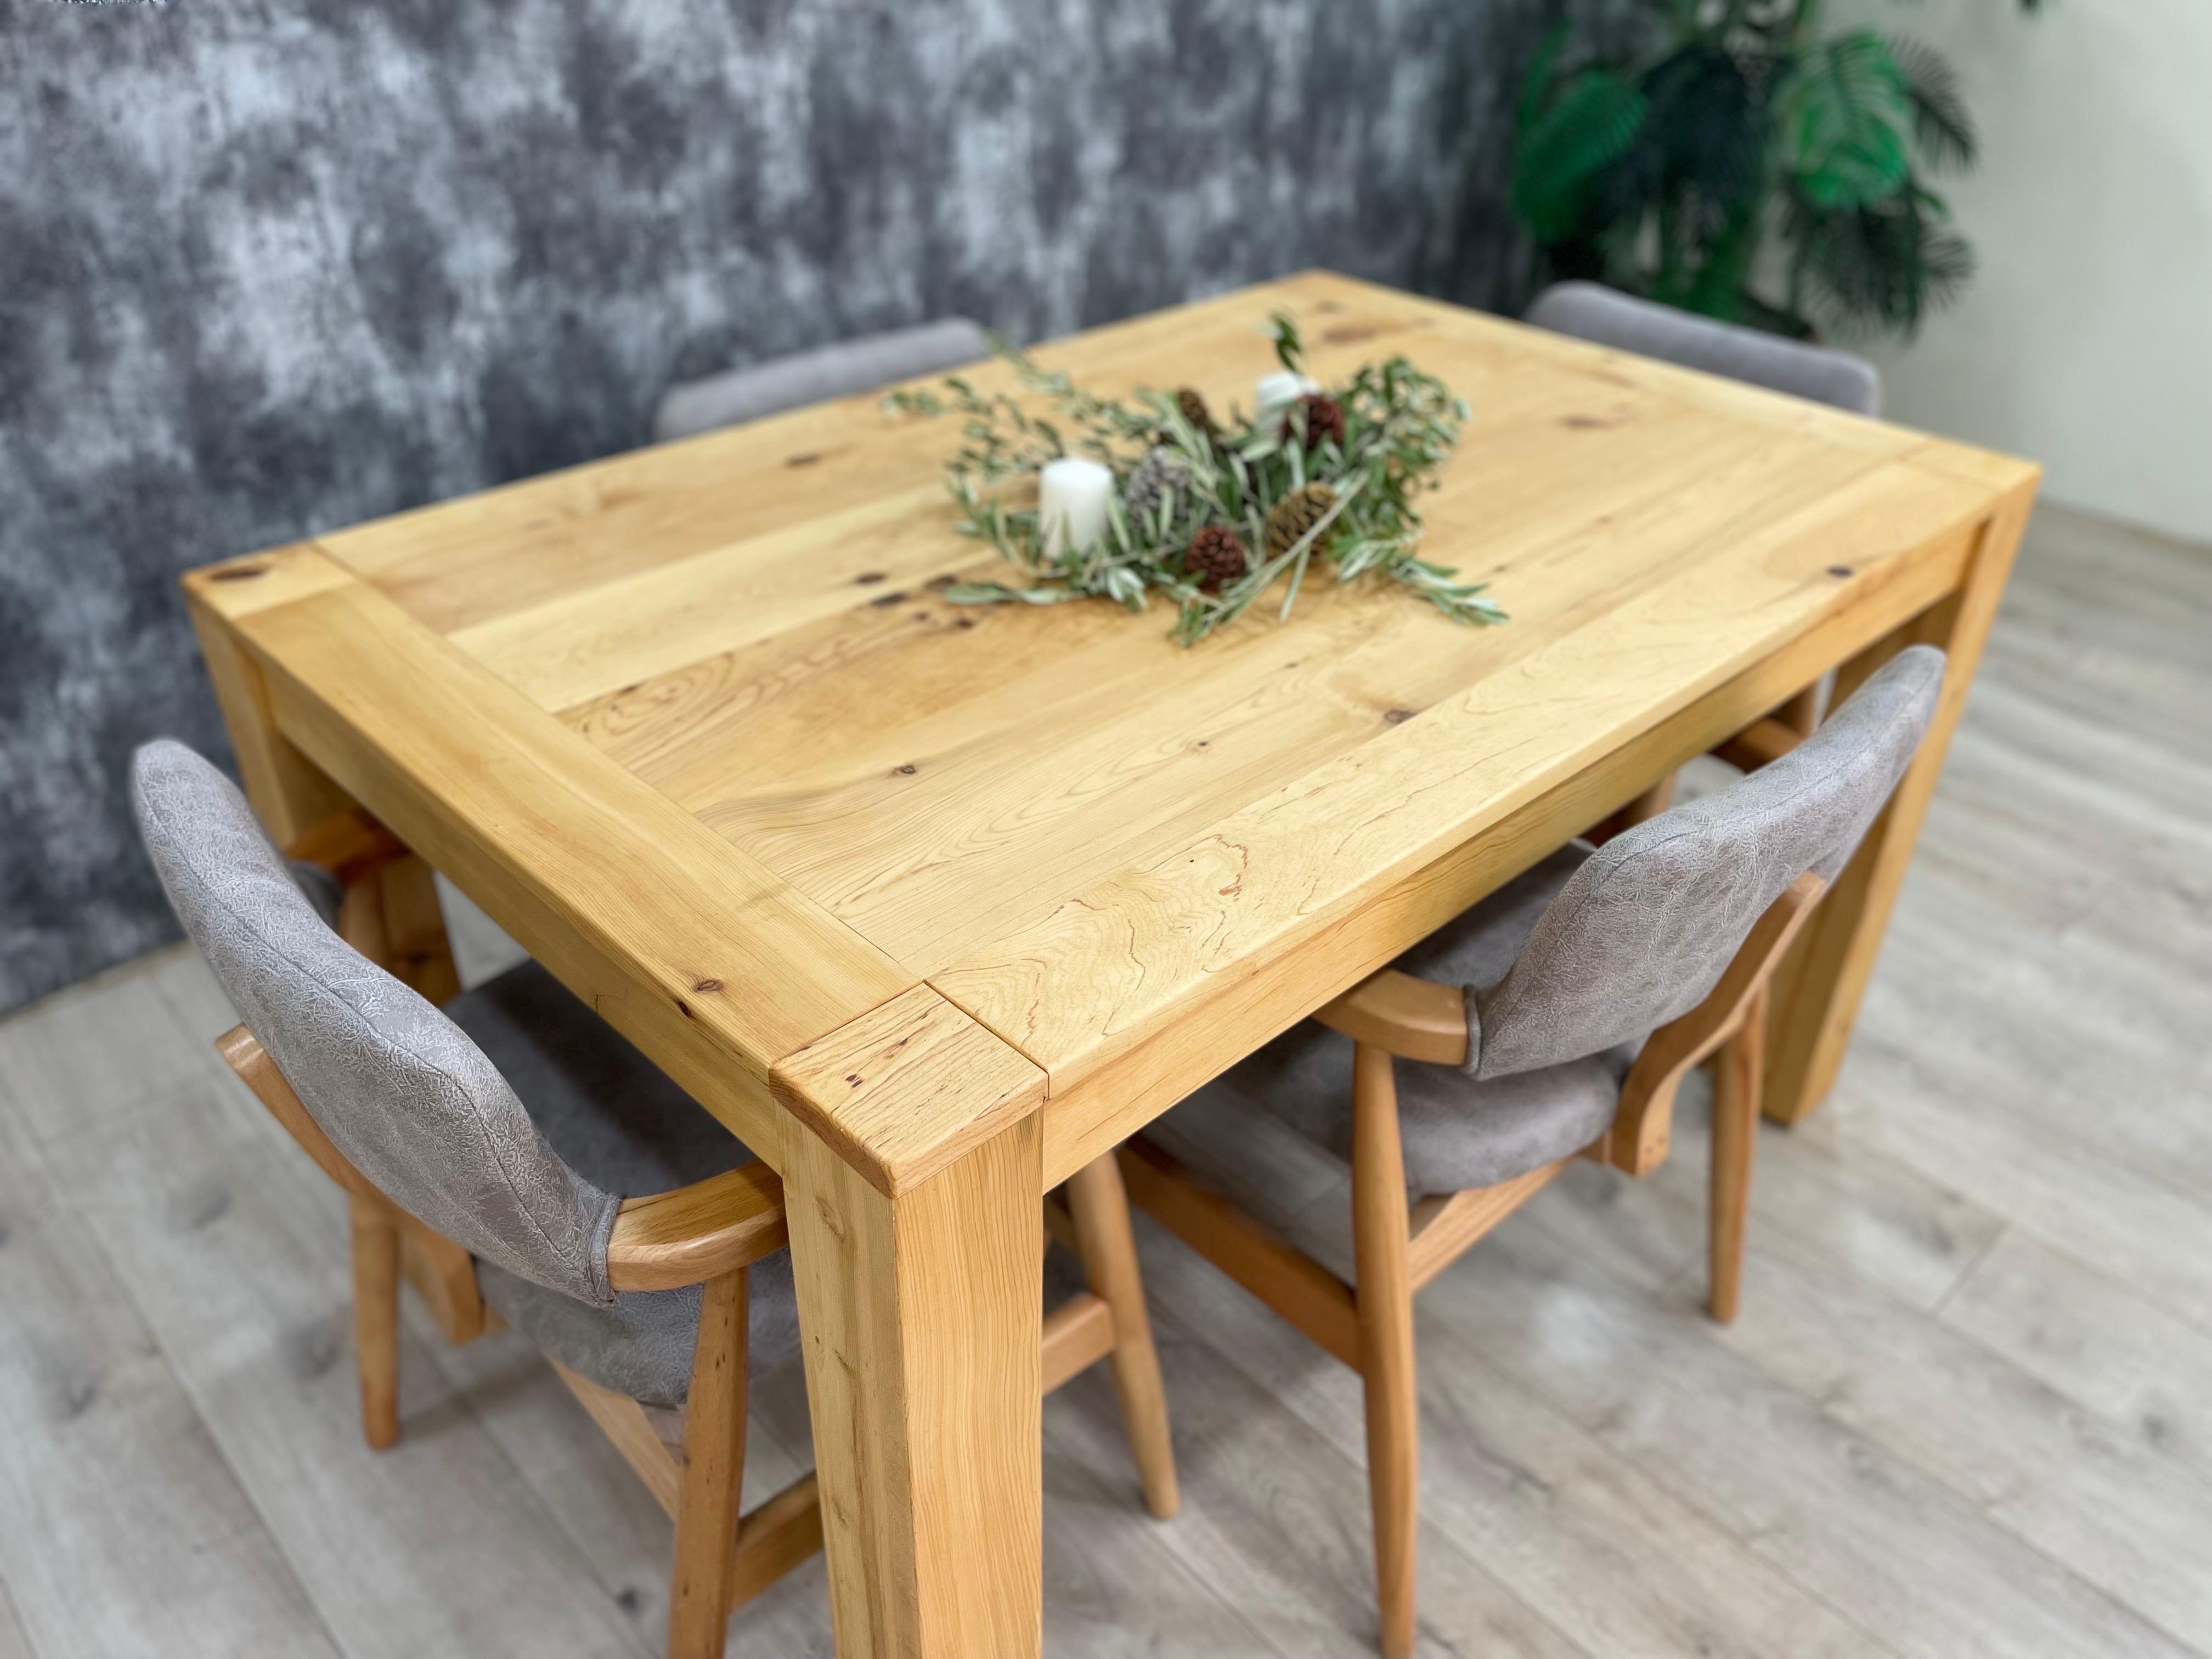 Hand-Crafted Scandinavian Modern Style Dining Table in Solid Cedar Wood, Made to Order For Sale